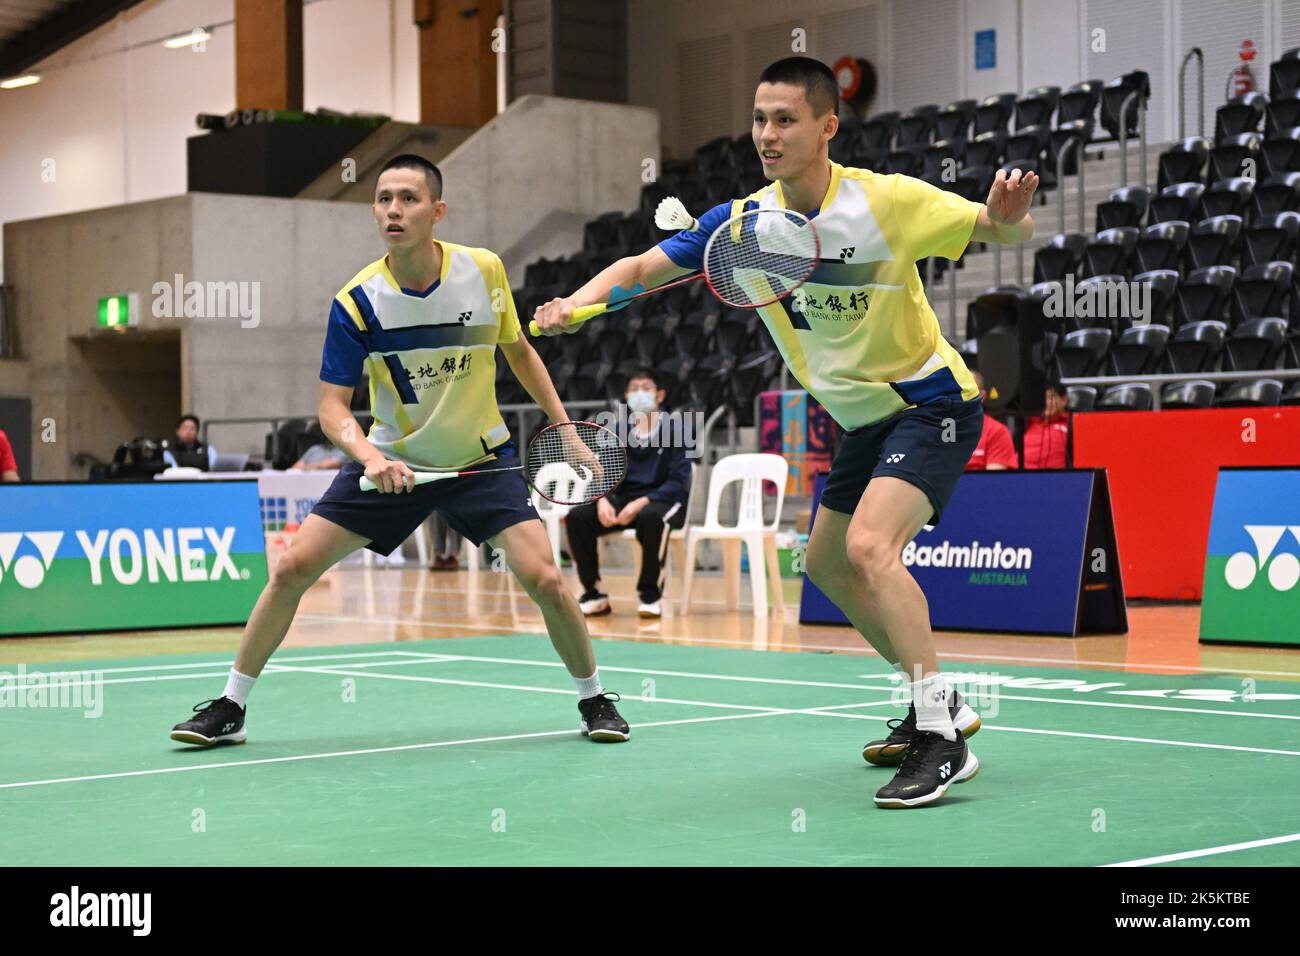 Sydney, Australia. 09th Oct, 2022. Llee Fang-Jen (L) and Lee Fang-Chih (R) of Chinese Taipei seen in action during the YONEX Sydney International 2022 Men's Double finals match against Nyl Yakura and adam xingyu dong (Canada). Lee Fang-Jen and Lee Fang-Chih won the match 21-12, 16-21, 21-16. (Photo by Luis Veniegra/SOPA Images/Sipa USA) Credit: Sipa USA/Alamy Live News Stock Photo